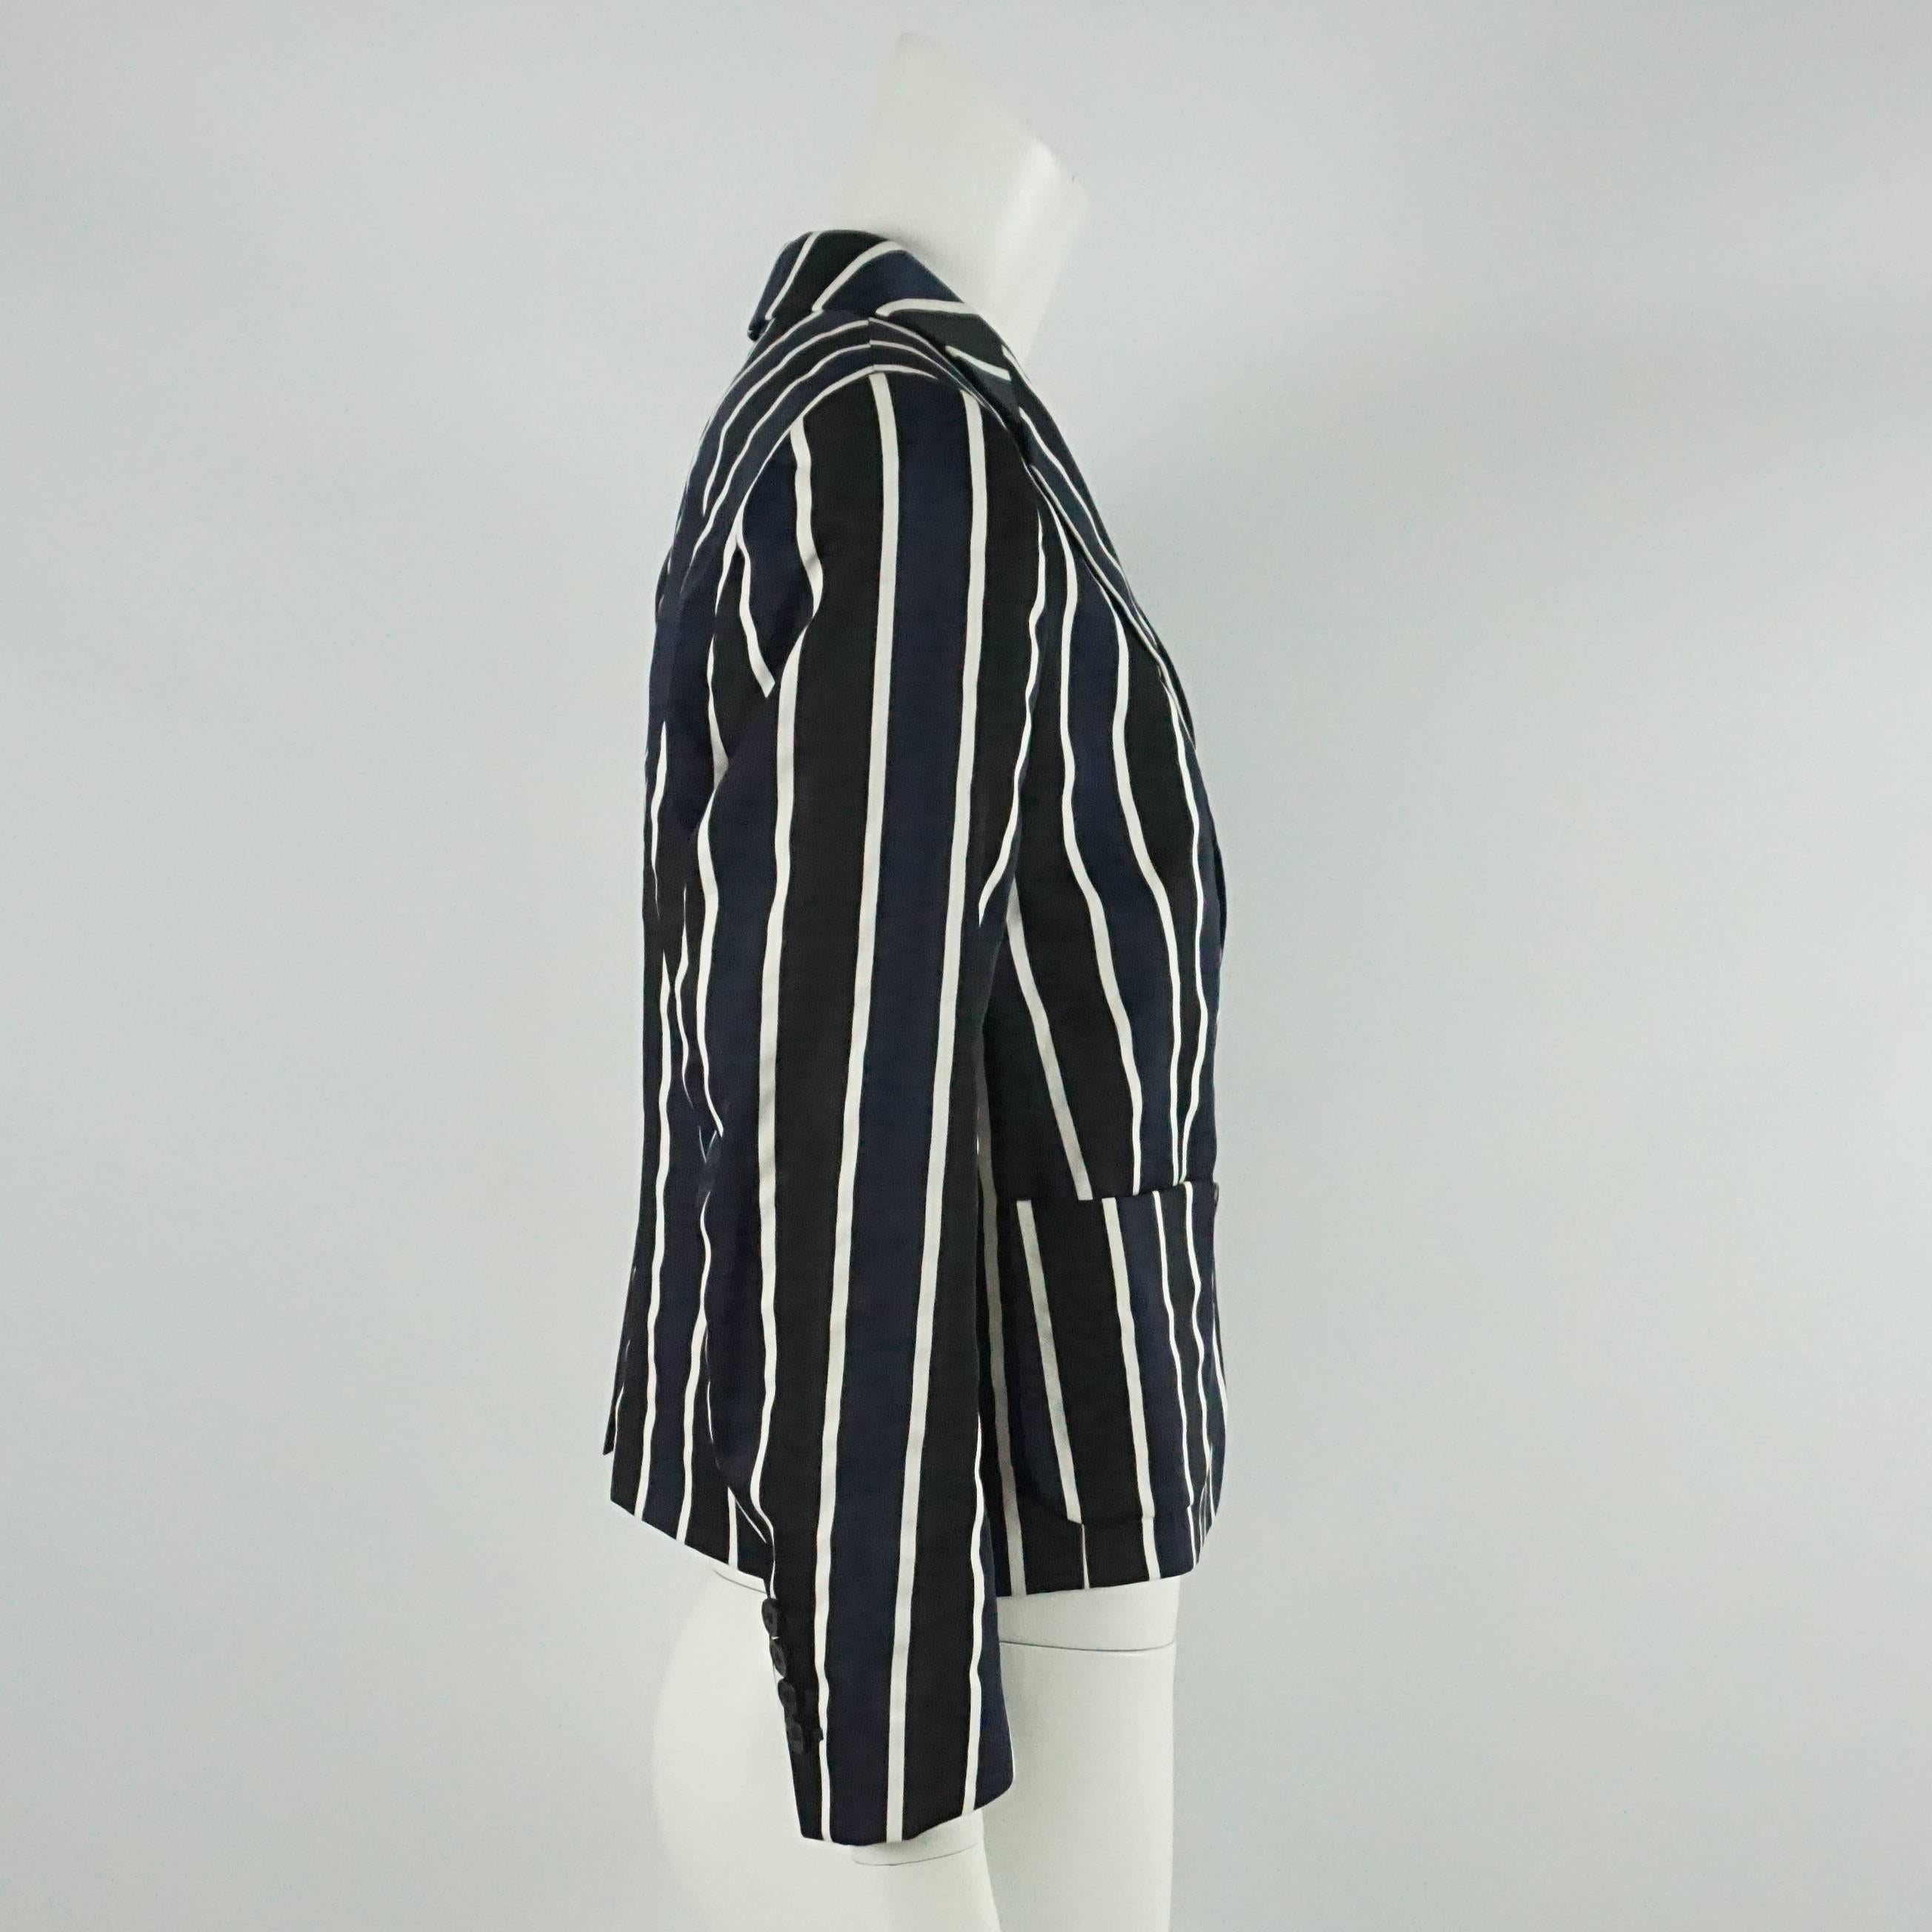 This beautiful Dries Van Noten silk jacket has black, navy, and white stripes. This jacket has front buttons and pockets. This jacket is in very good condition with some very minor wear.

Measurements
Shoulder to Shoulder: 15.25